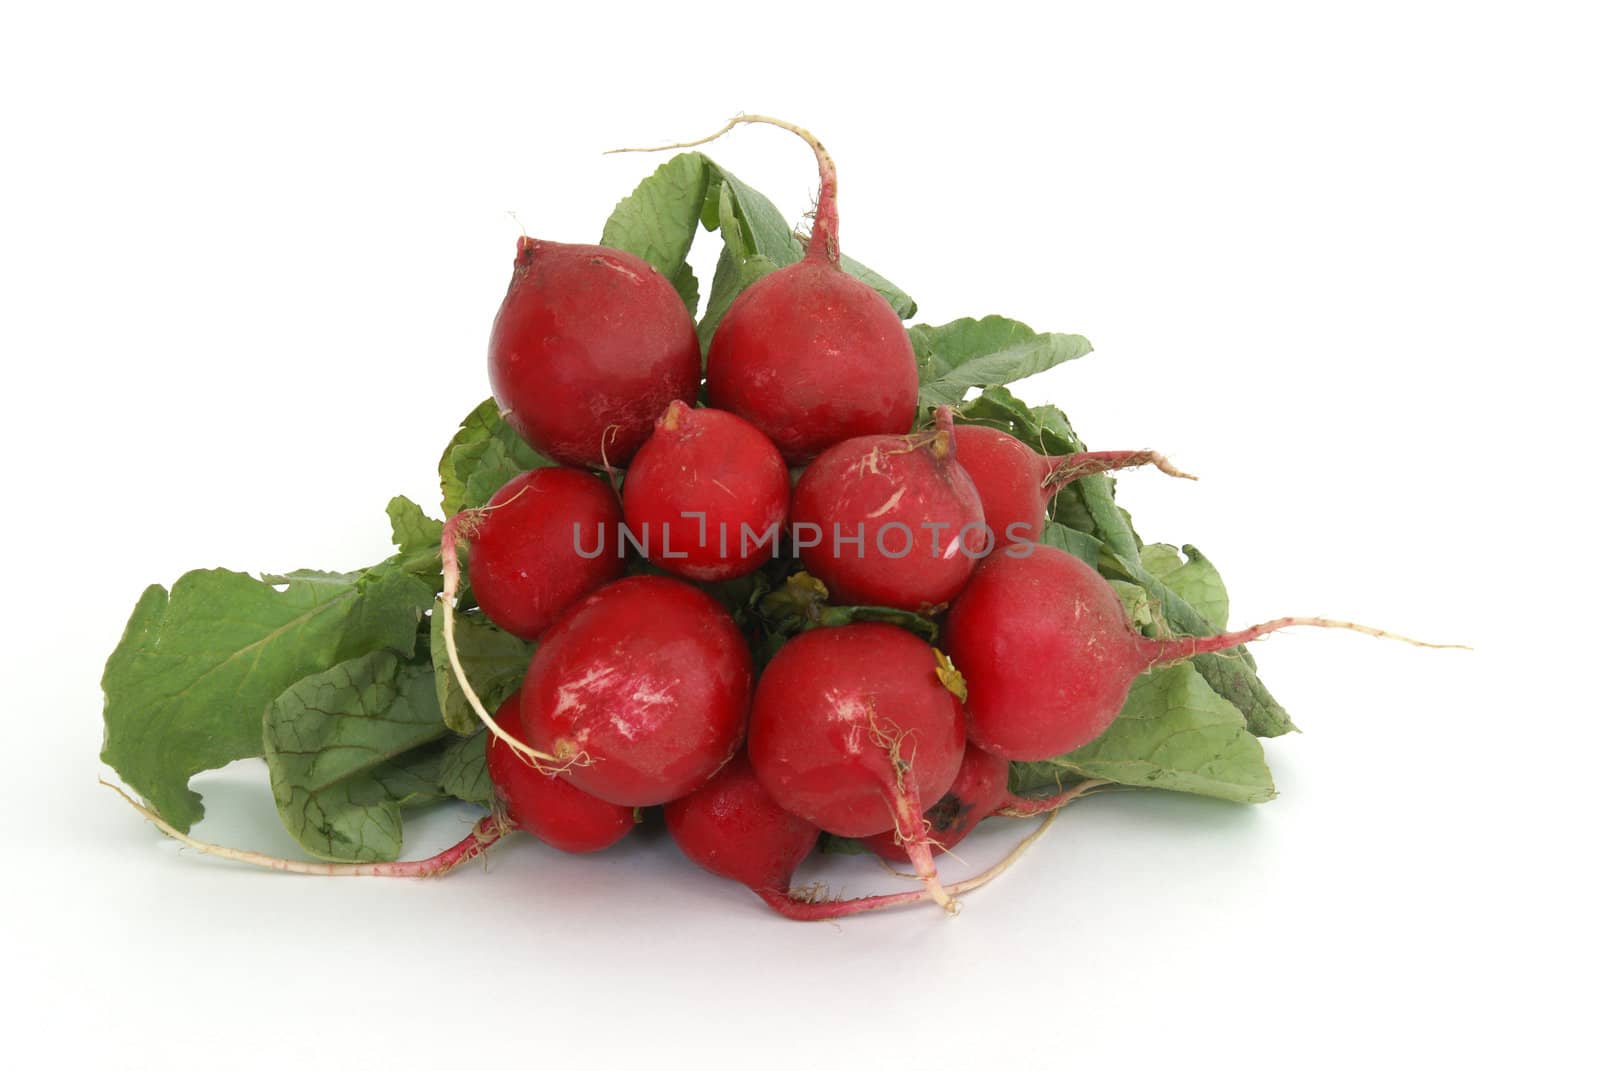 A group of fresh radishes over white background.